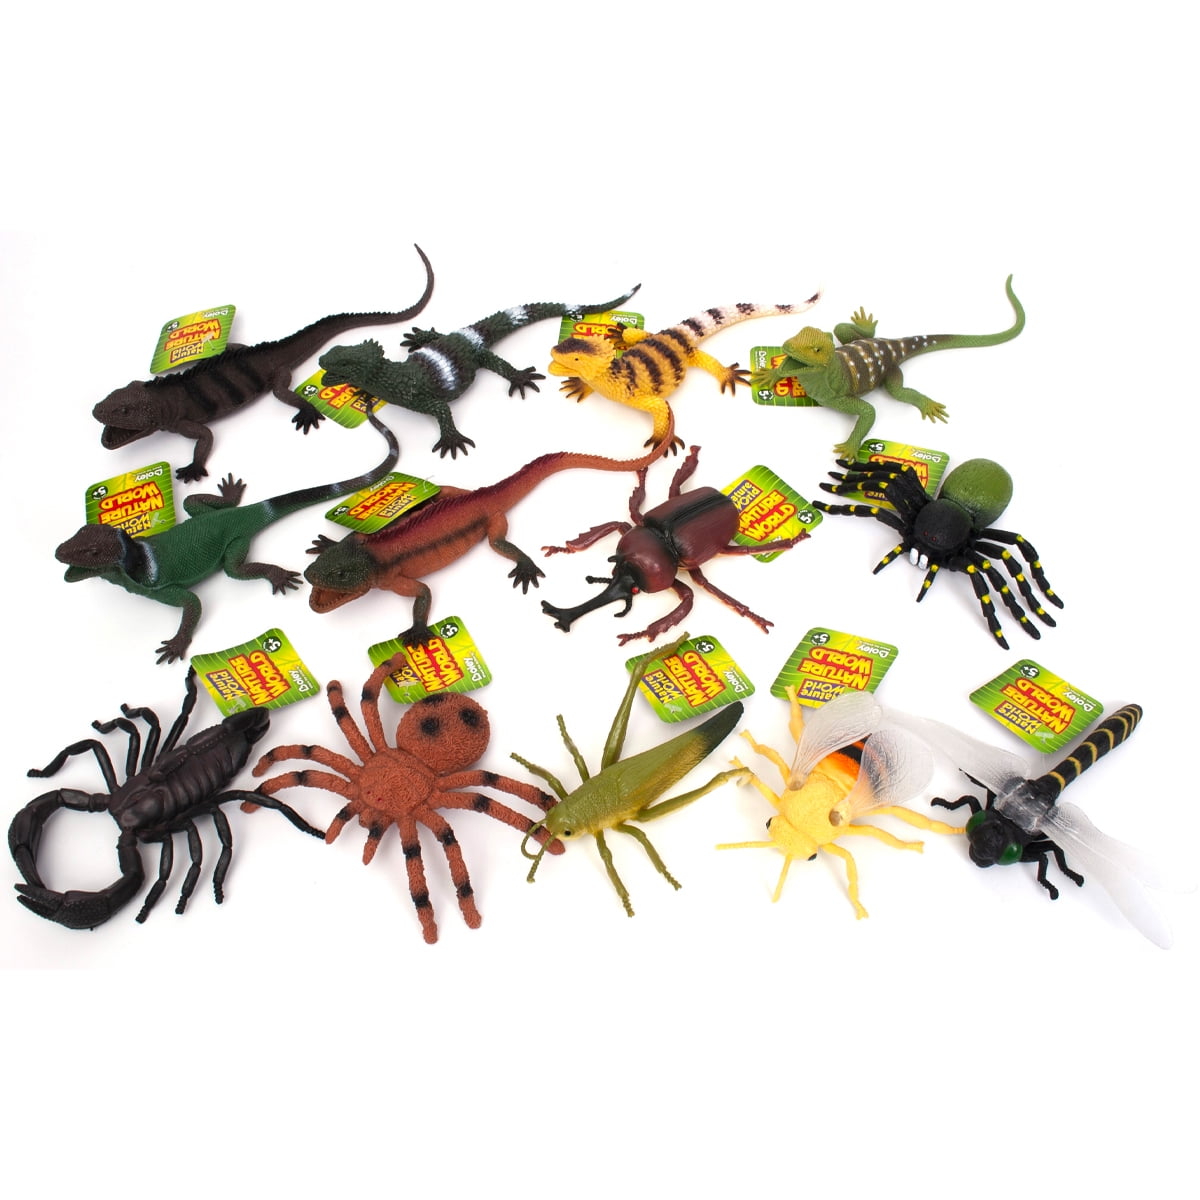 Boley Nature World Plastic Insect and Lizard Toy Set for Kids, 12 Piece ...